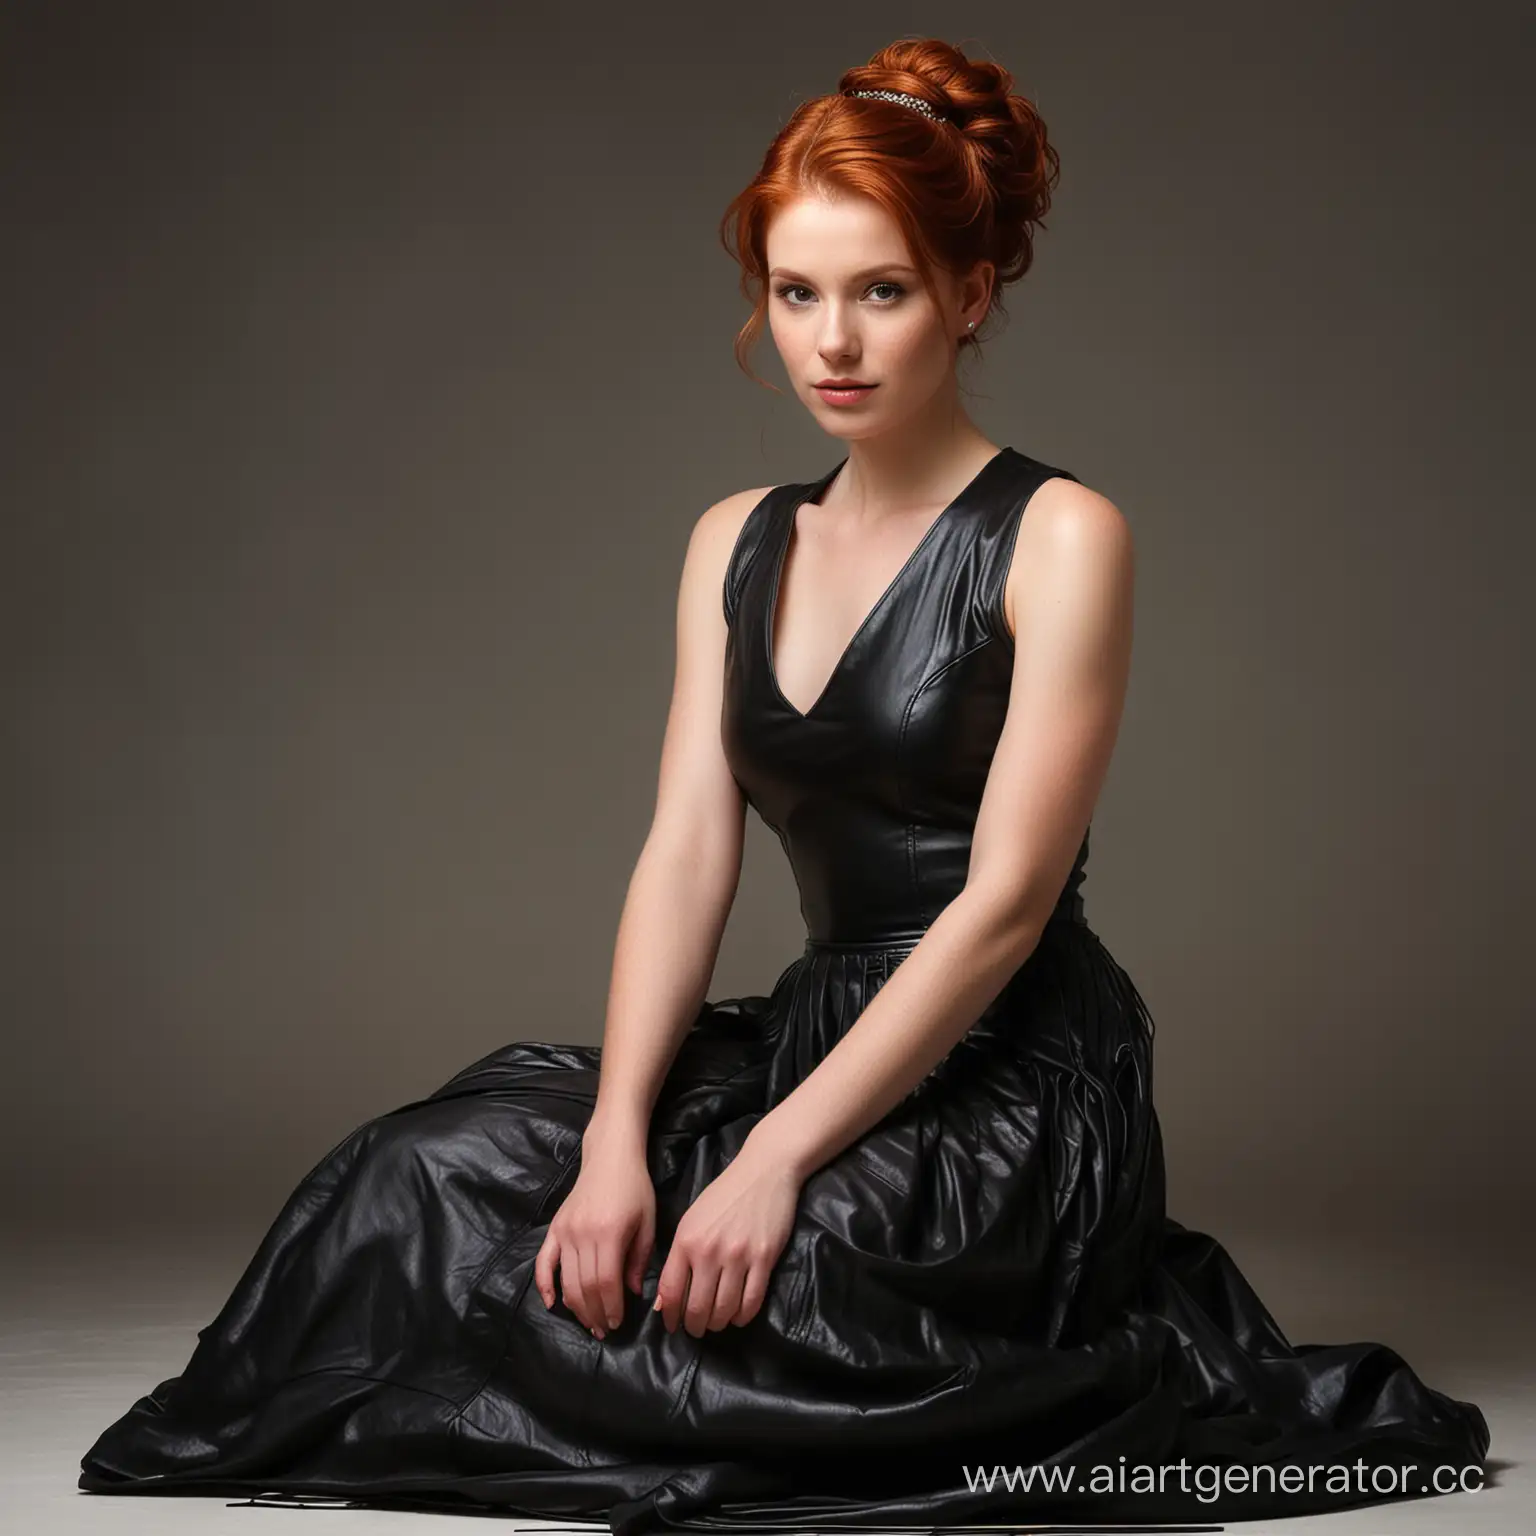 Elegant-Redhead-Woman-in-Leather-Skirt-Pose-with-Dramatic-Lighting